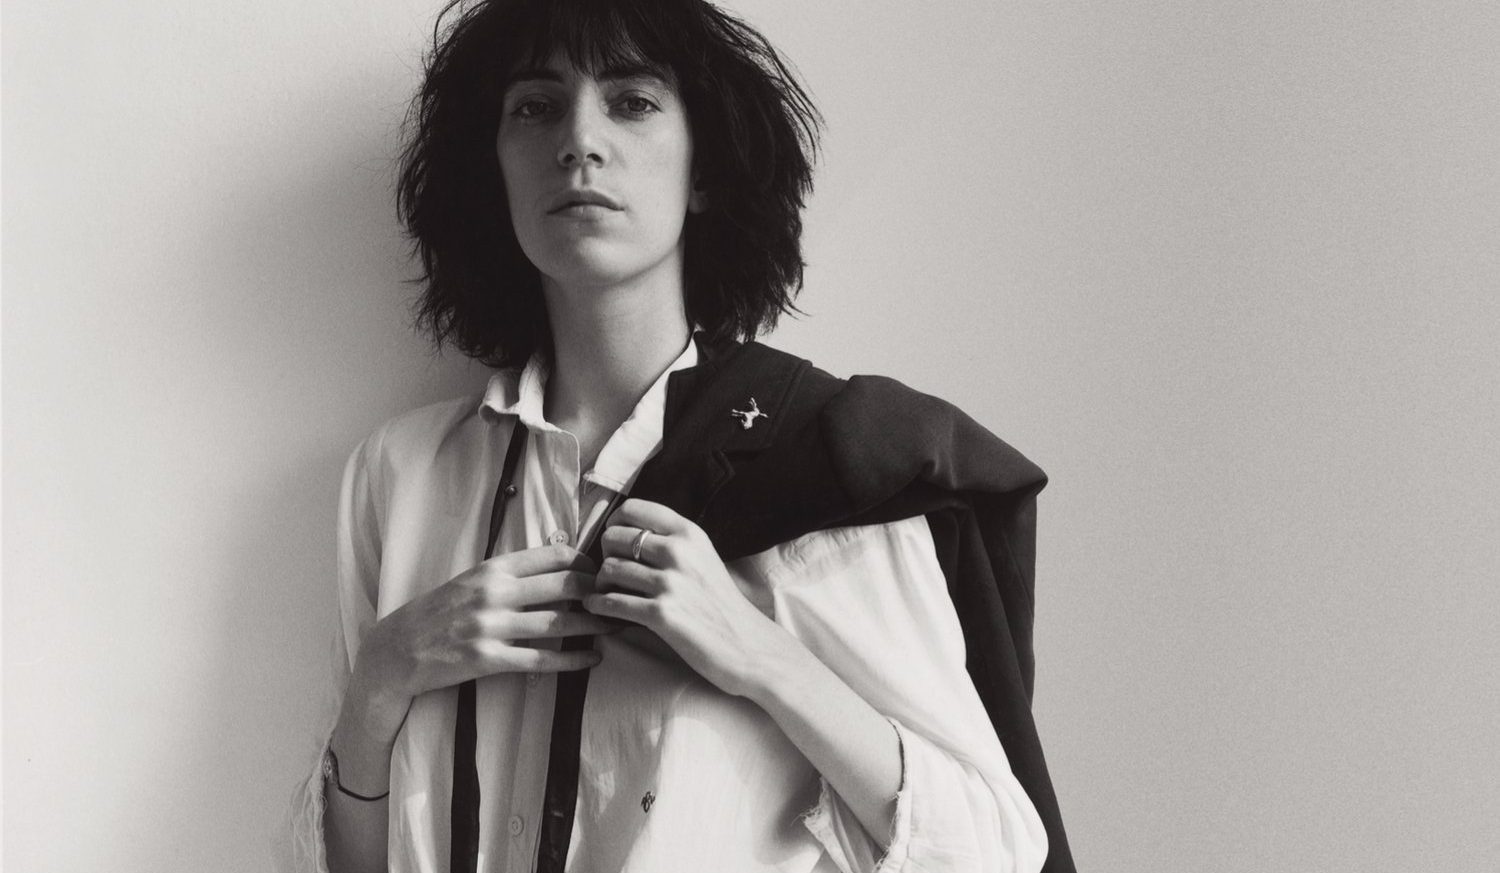 Cover photo from Horses by the Patti Smith Group